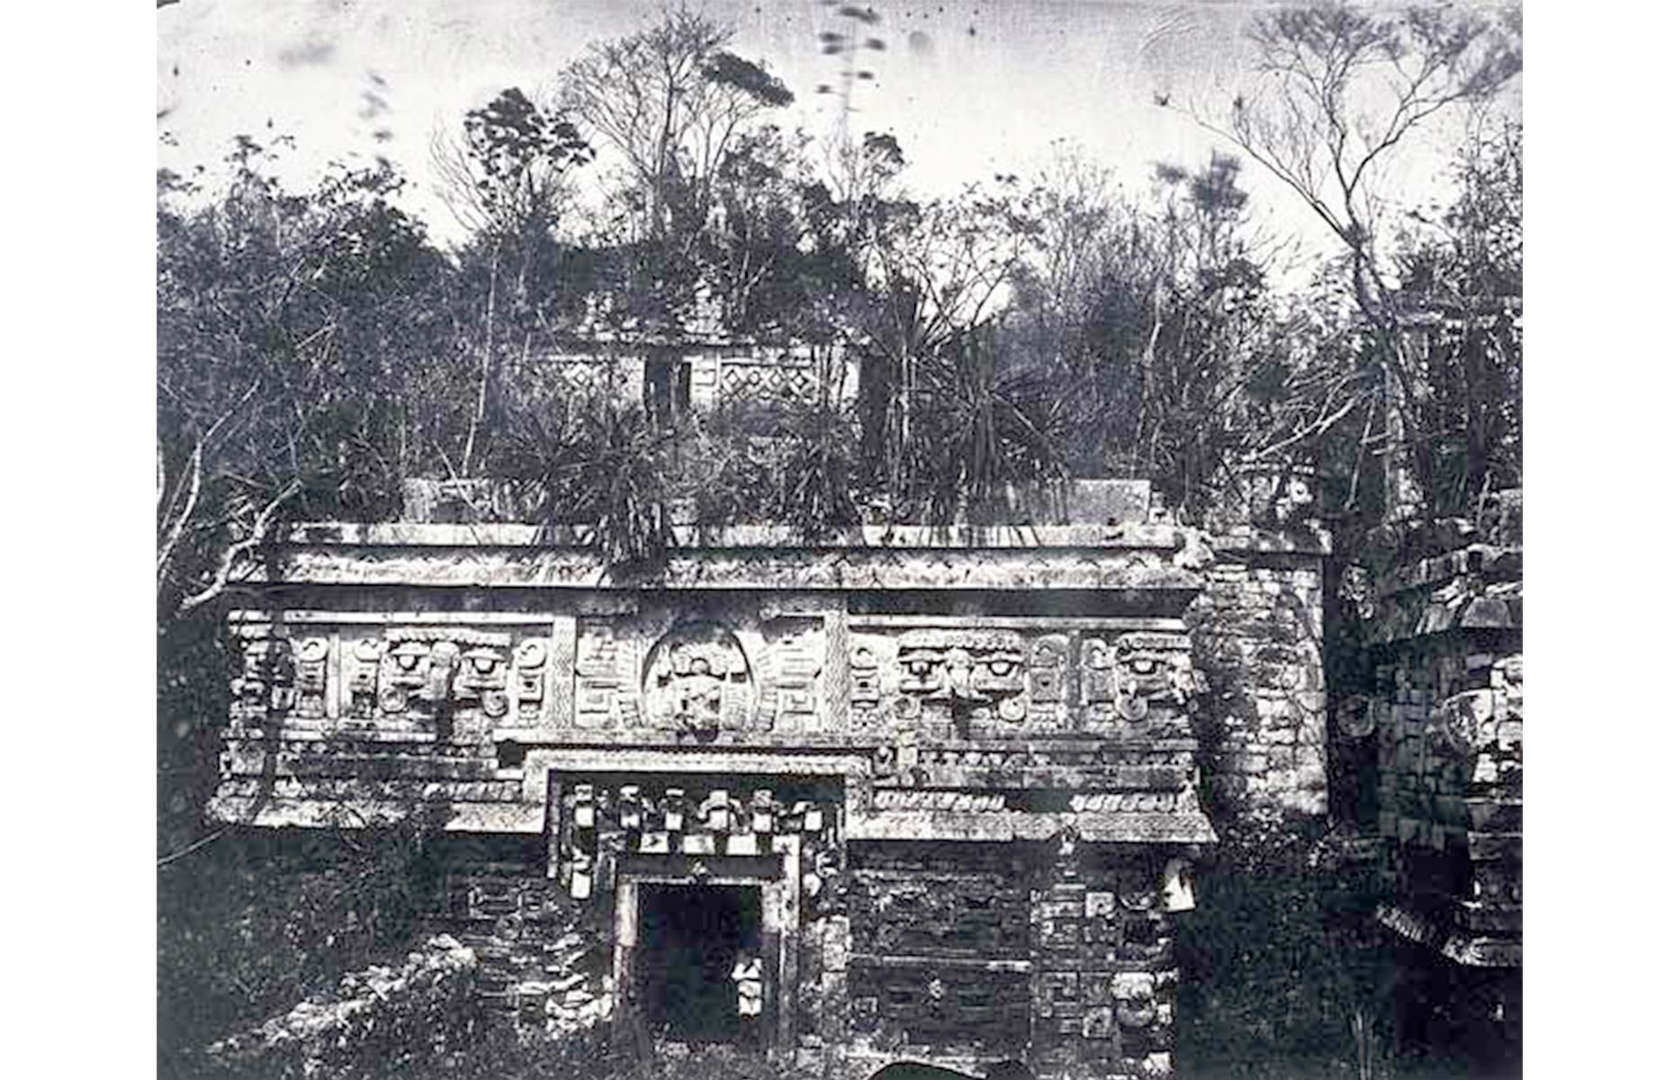 Slide 24 of 41: You might be familiar with images of Chichén Itzá – an ancient Maya city known for landmarks like the grand, stepped pyramid of El Castillo. But this photograph, taken circa 1859–1860, shows the famous archaeological site in a rather different state. The city was once home to tens of thousands of people, flourishing around AD 600, when it was a political and commercial heartland of Maya civilisation. Yet it began to decline before the Spanish conquest. It's pictured here ruined and covered with vegetation in the mid-19th century.